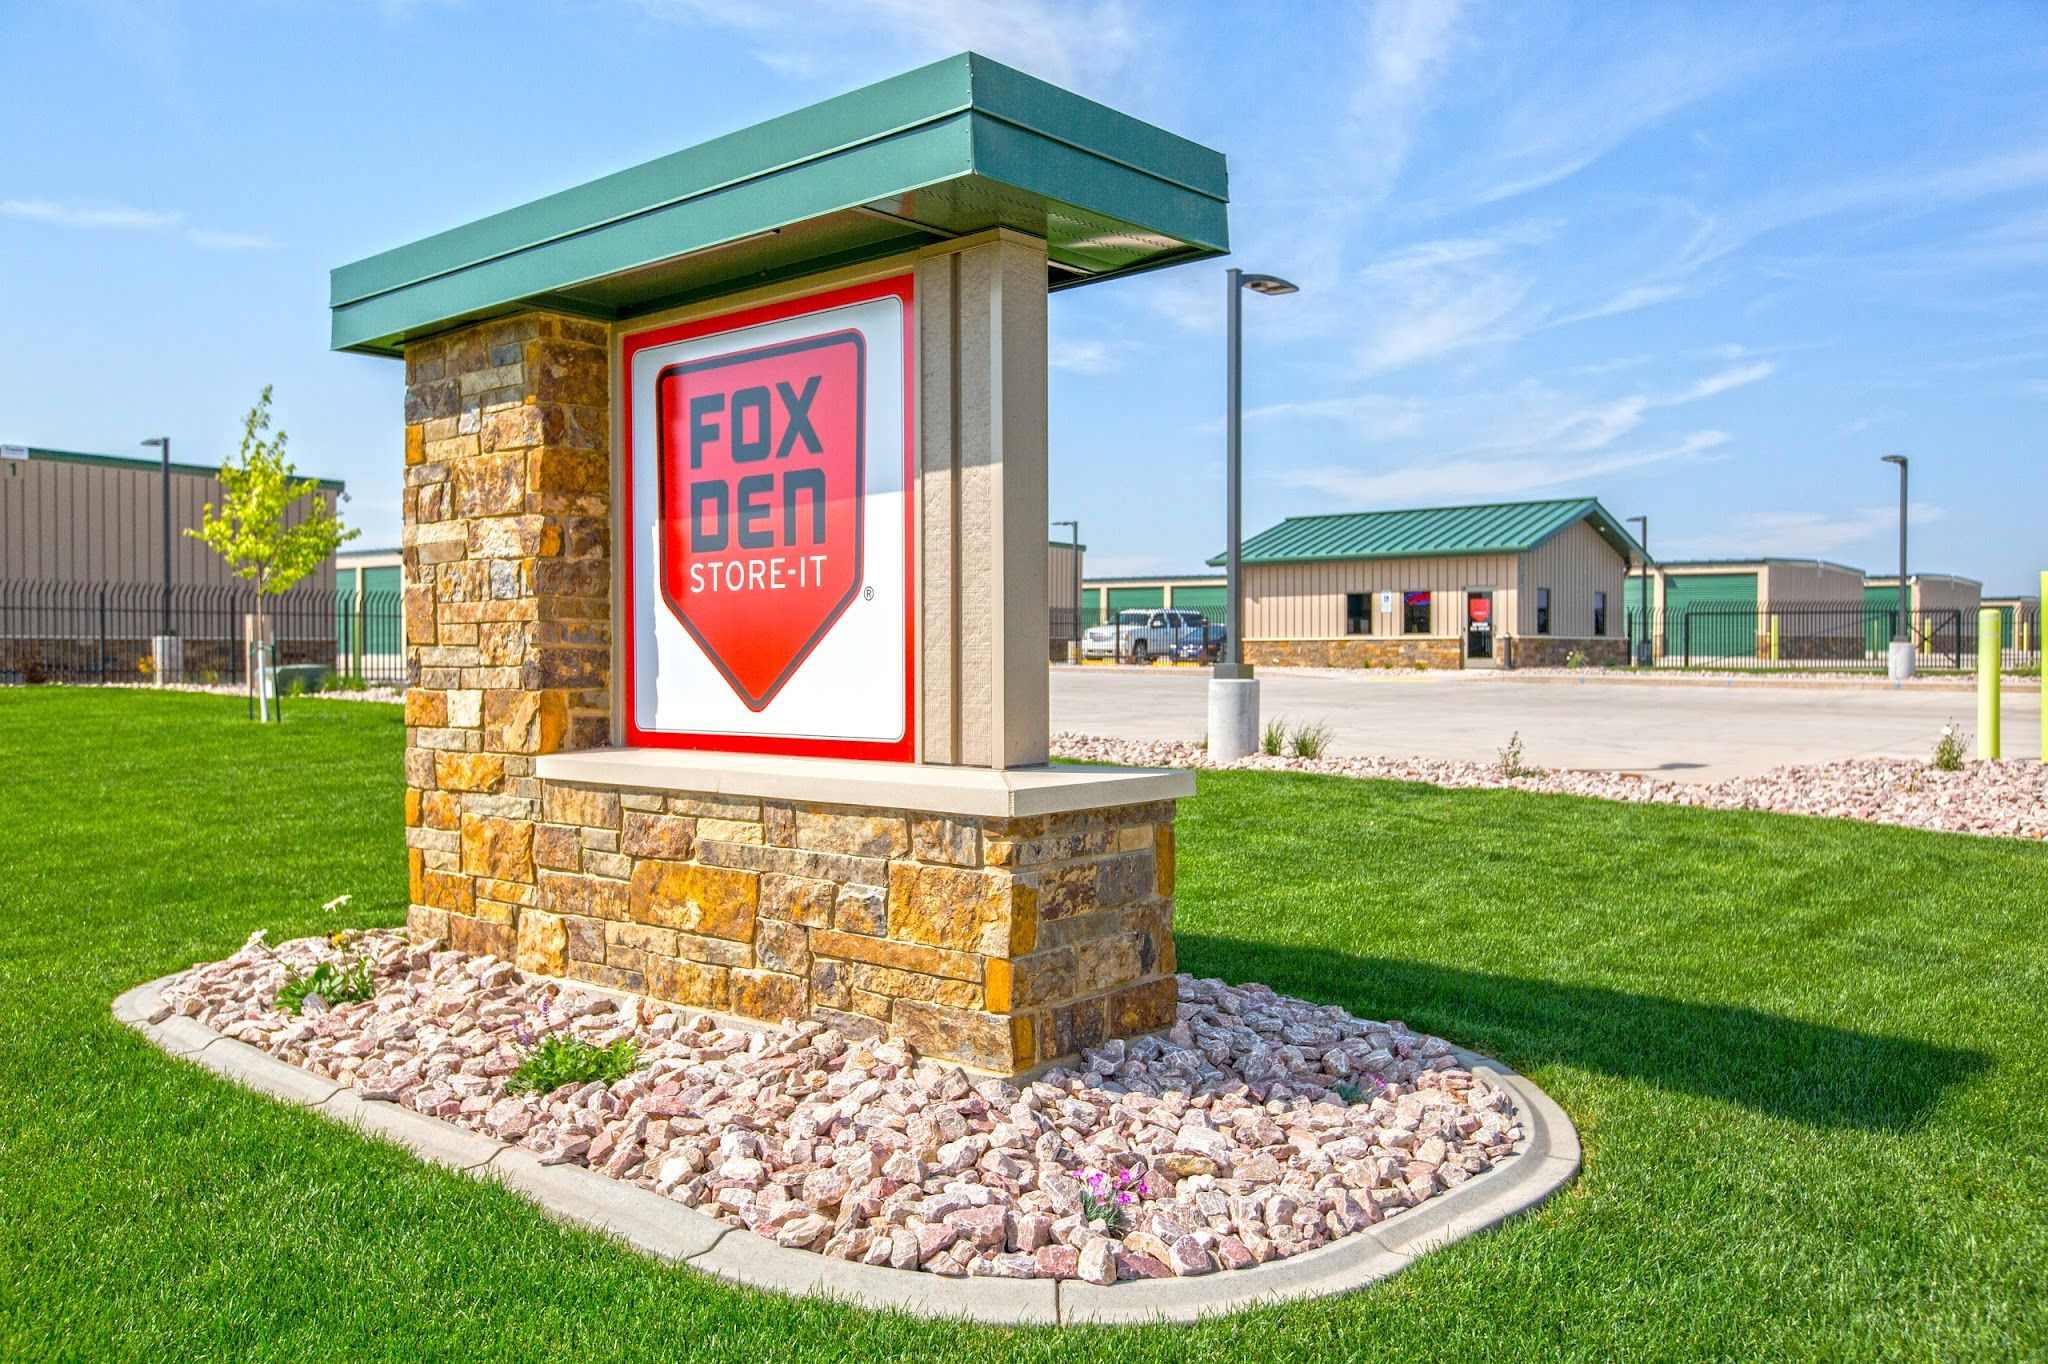 Services & Products Fox Den Store-It on Moon Meadows Dr in Rapid City SD